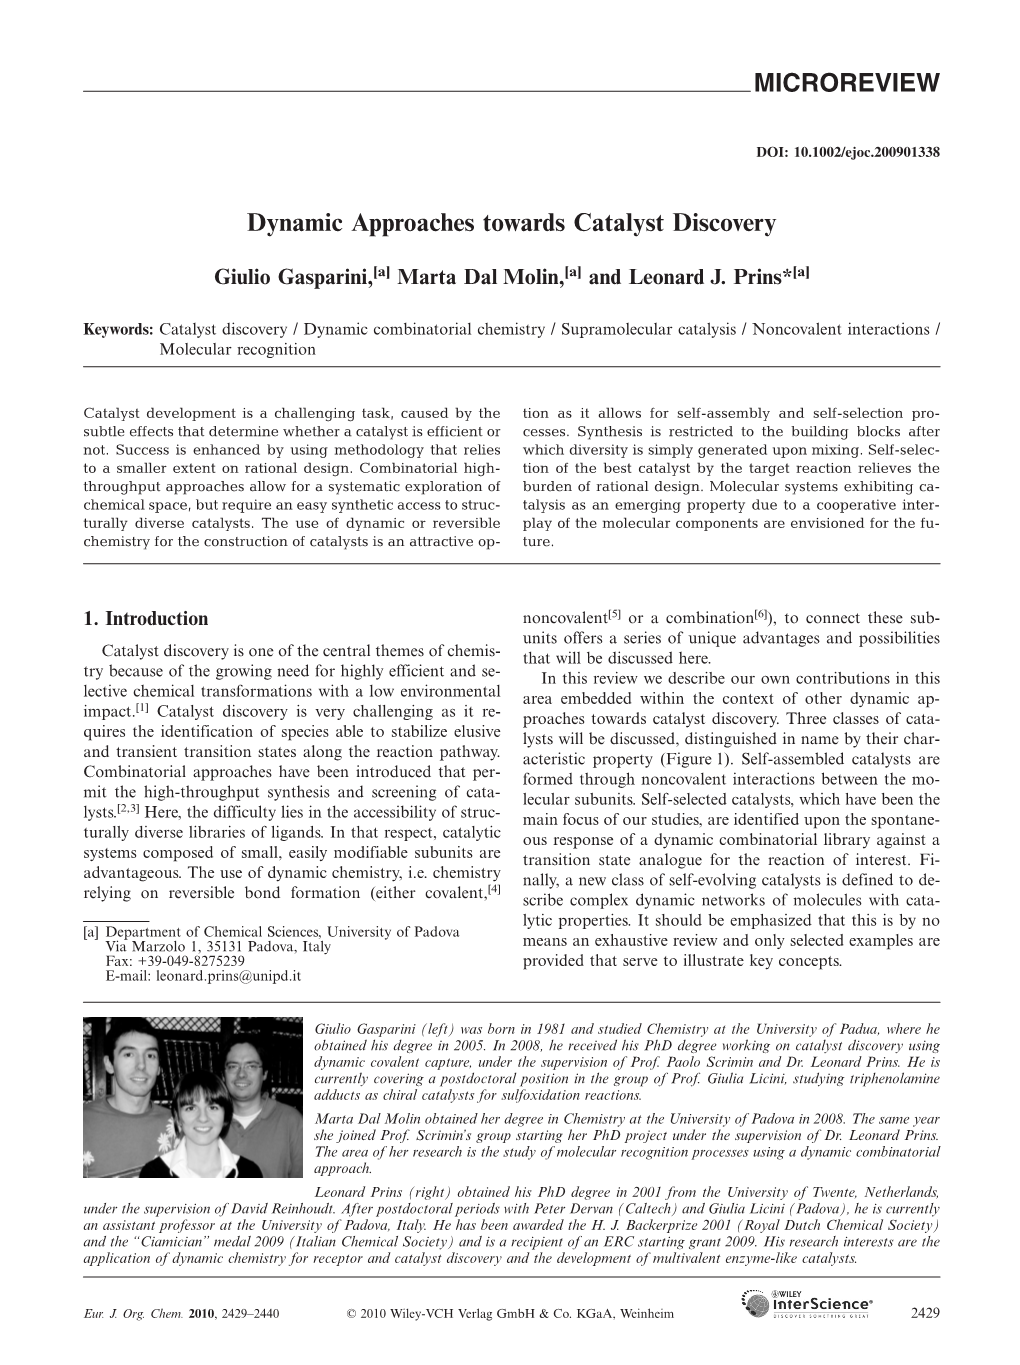 Dynamic Approaches Towards Catalyst Discovery